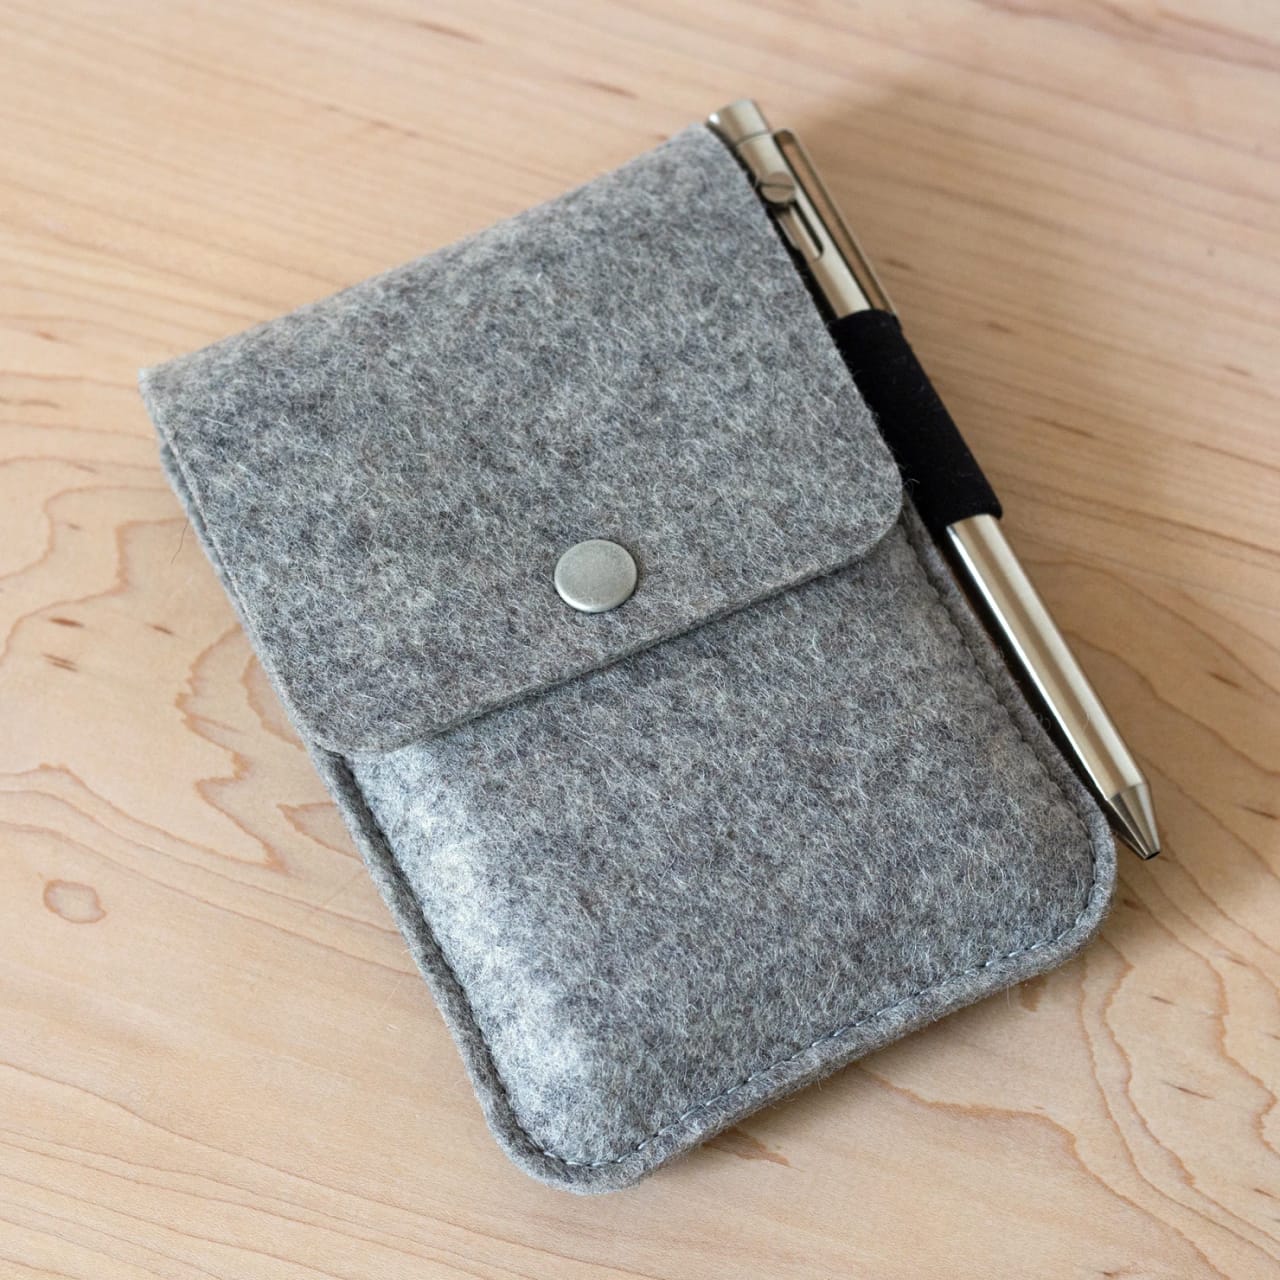 Textured gray felt pouch for paper cards with snap button flap and elastic pen holder loop.